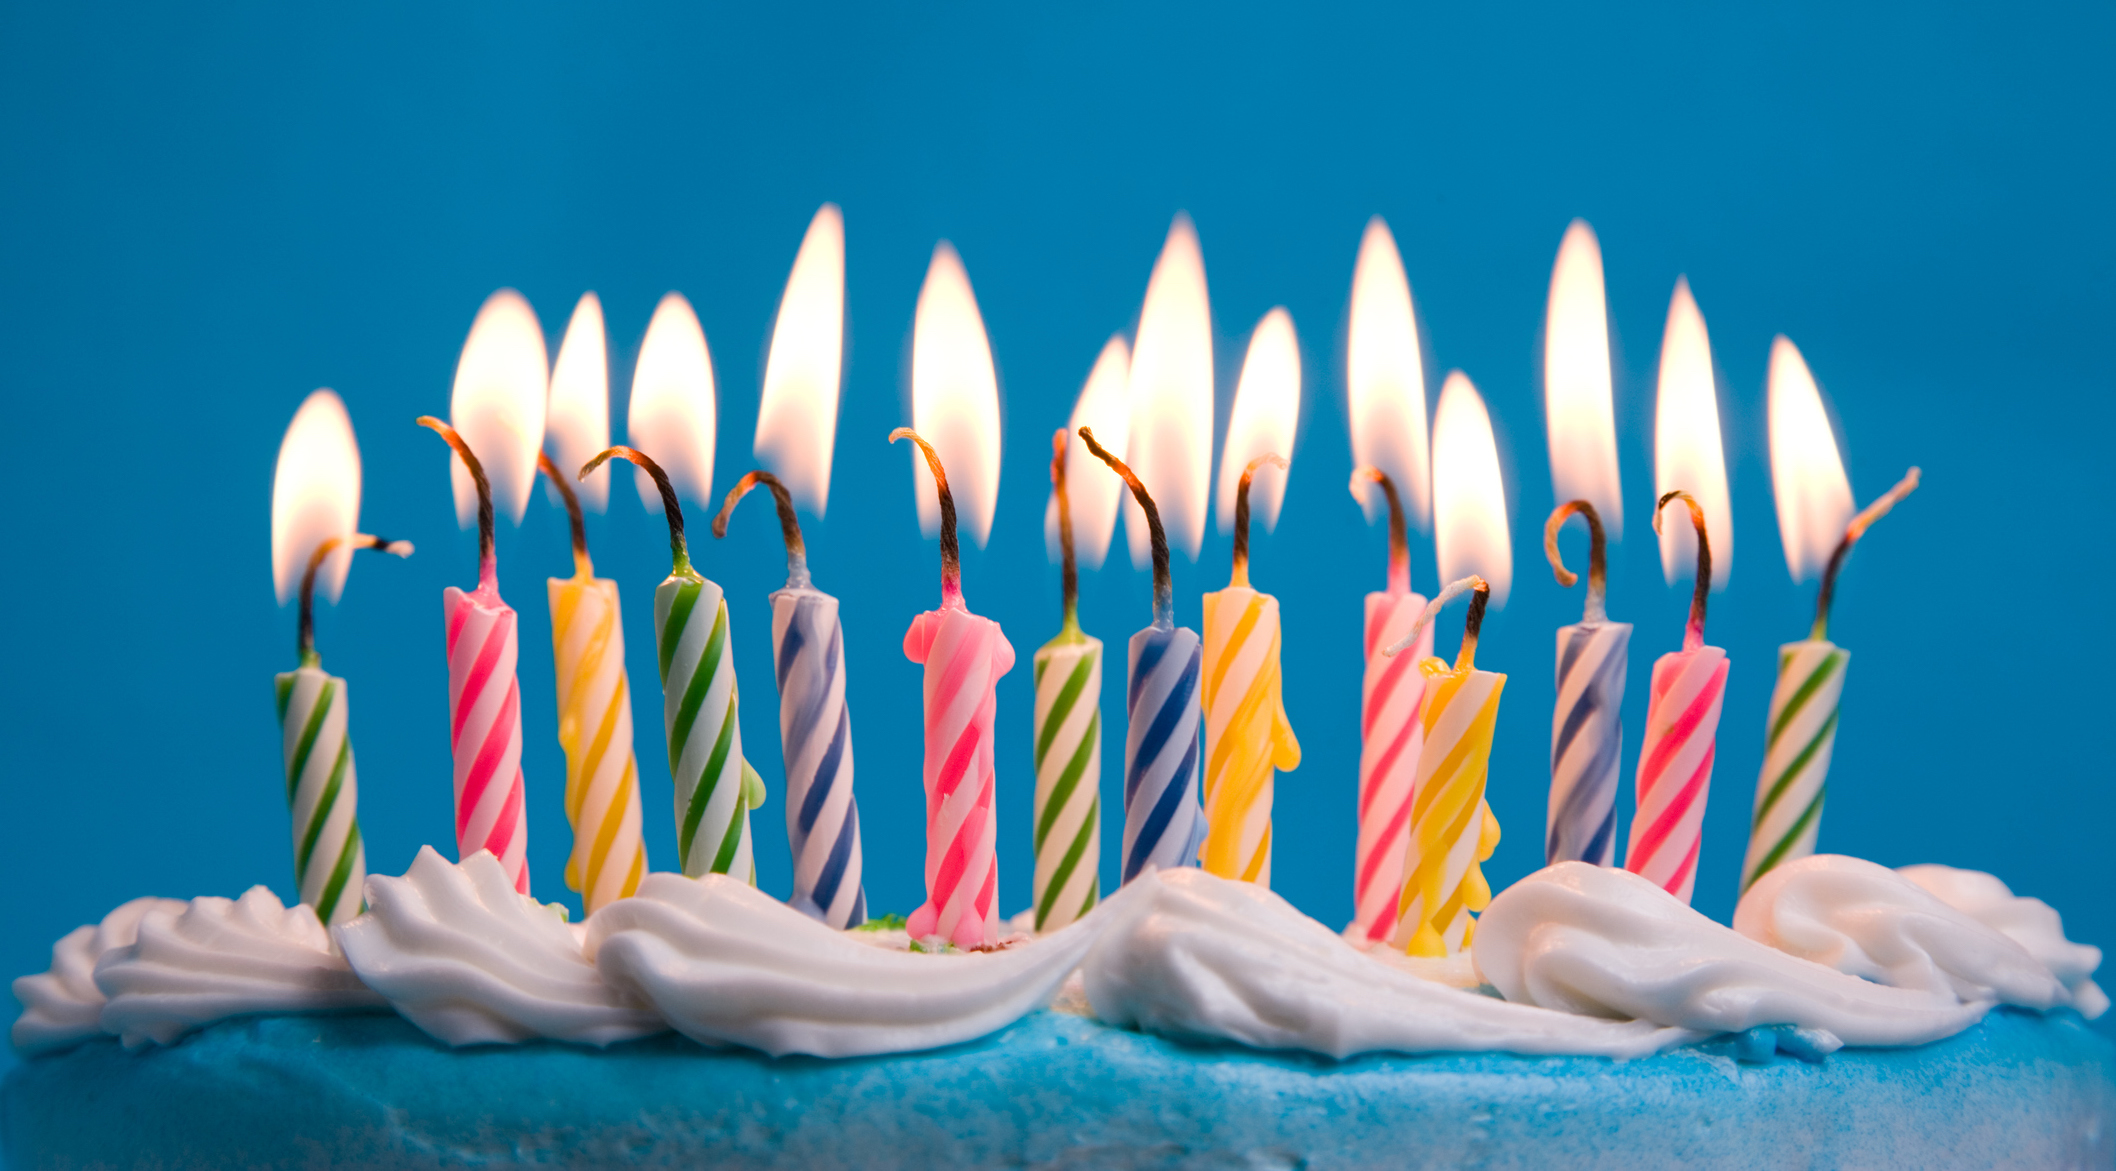 Is COVID-19 causing us to rethink blowing out candles on a birthday cake? - IStock BirthDay CanDles